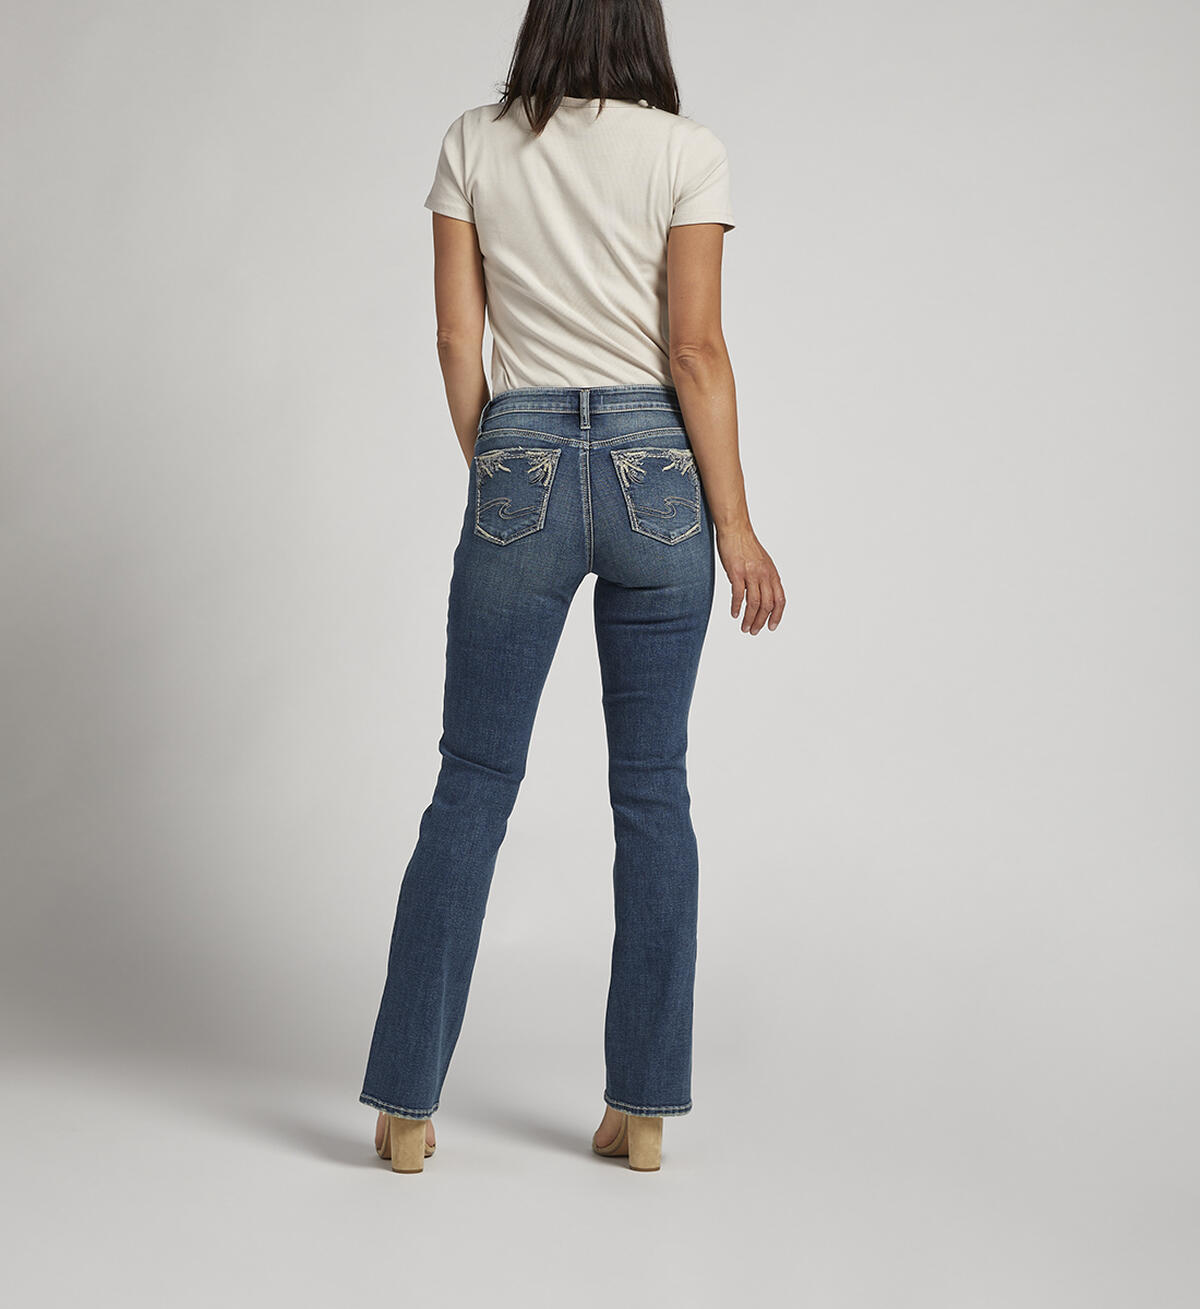 Buy Elyse Mid Rise Slim Bootcut Jeans for USD 58.00 | Silver Jeans US New